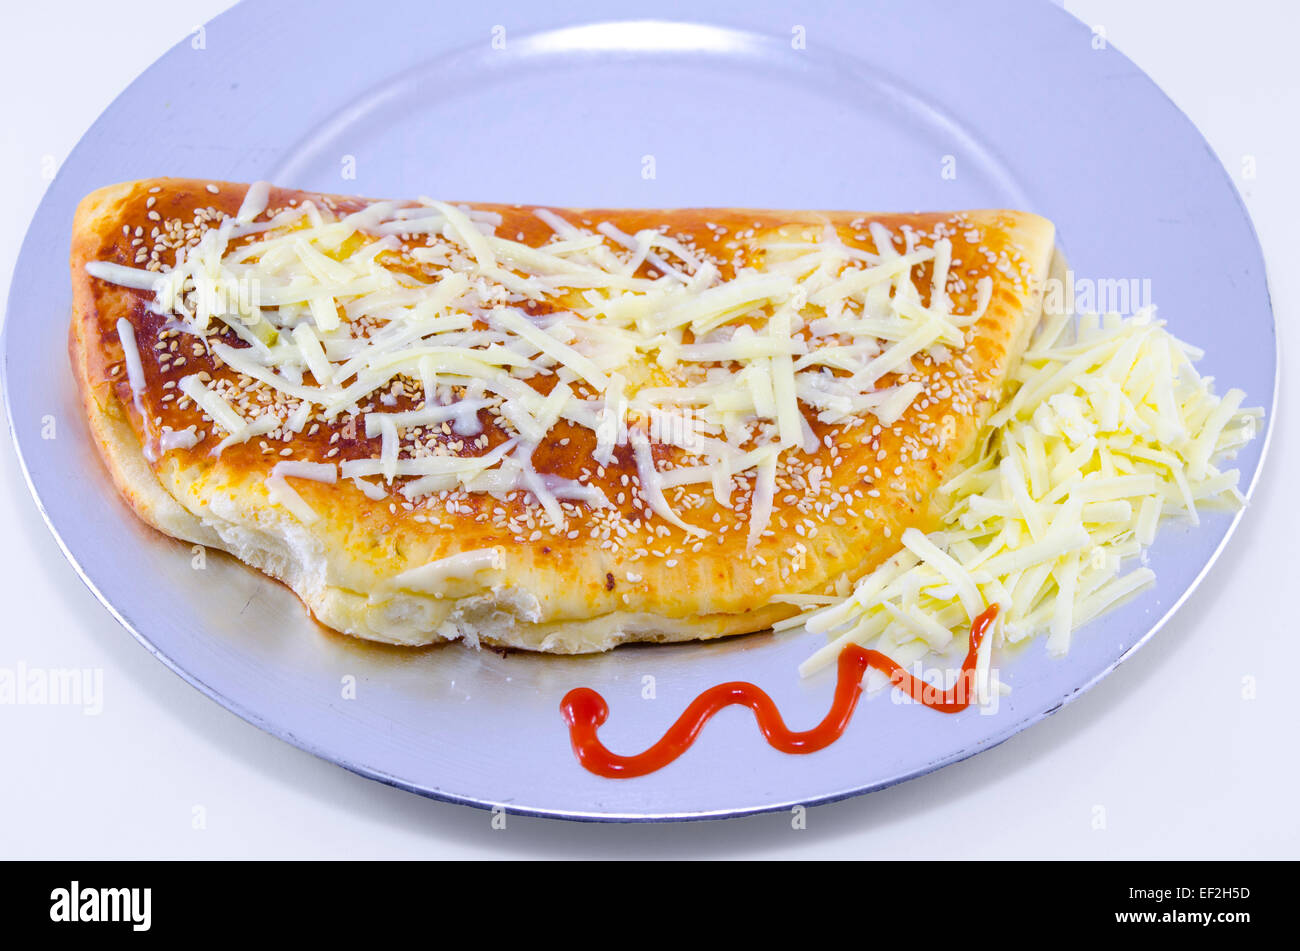 Home baked pirogue pizza  on a plate decorated with grated cheese and ketchup Stock Photo